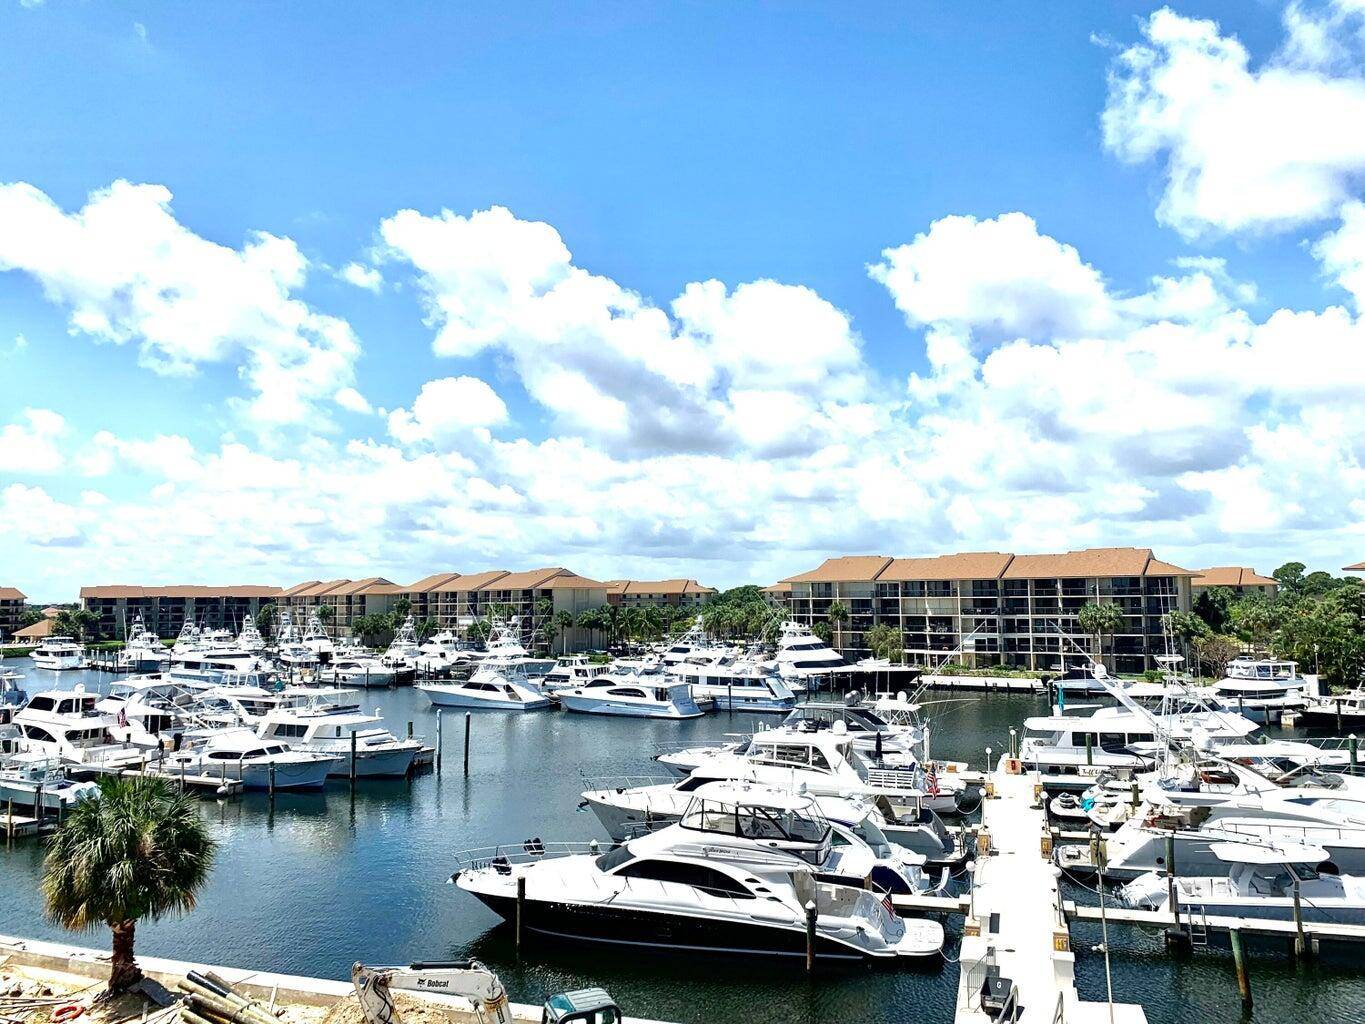 Rent this newly remodeled spacious condo enjoy sunshine sunsets from your balcony with direct Marina Views.